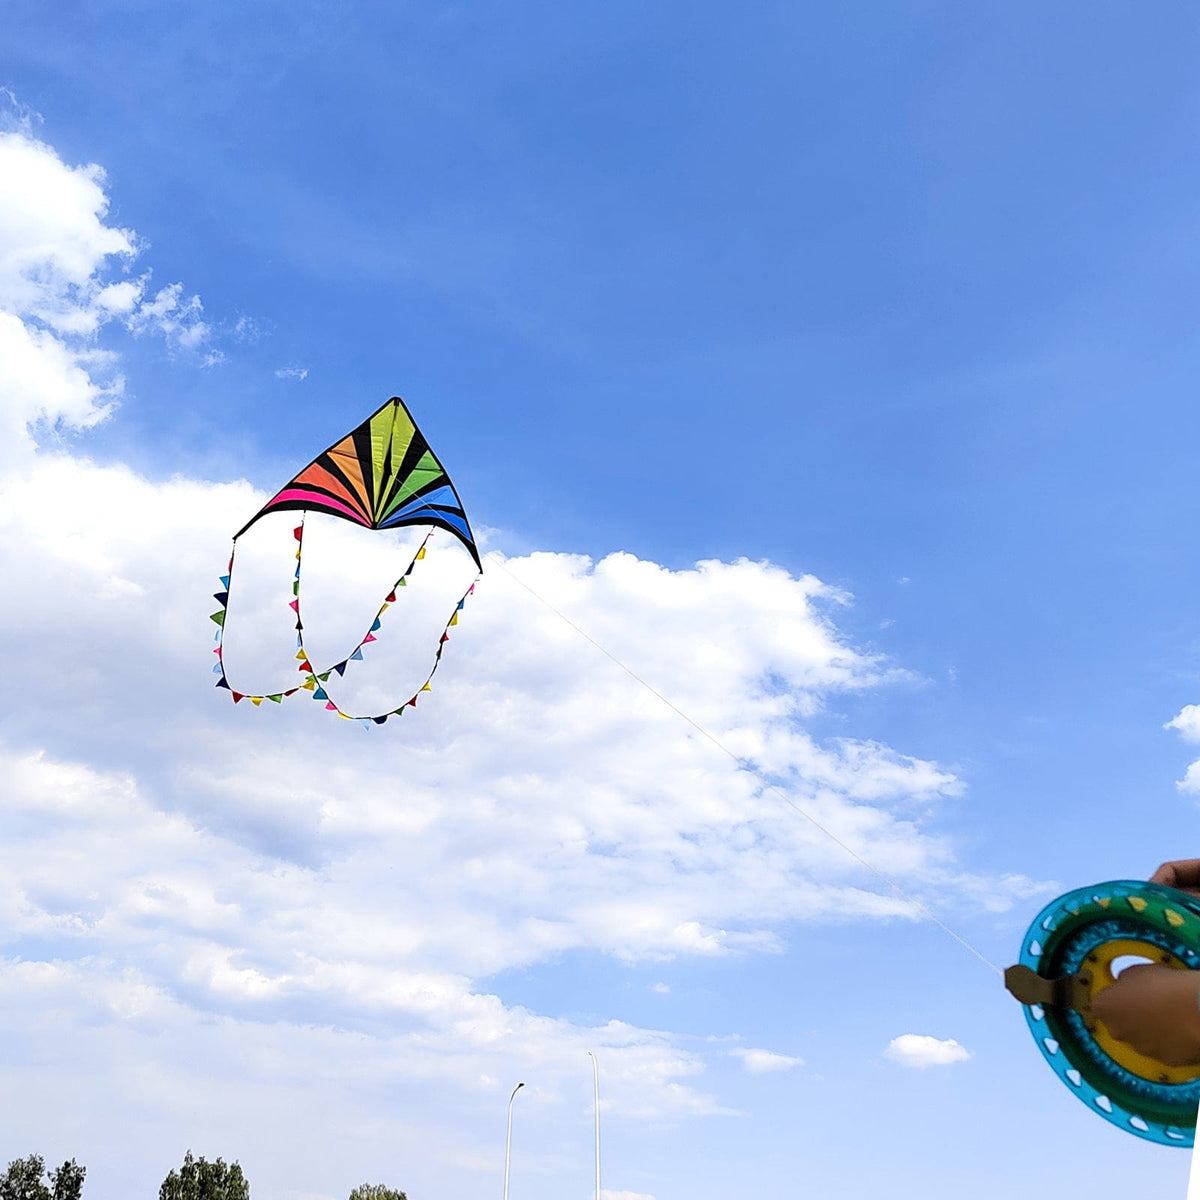 Simxkai Large Rainbow Delta Kite for Kids & Adults Easy to Fly